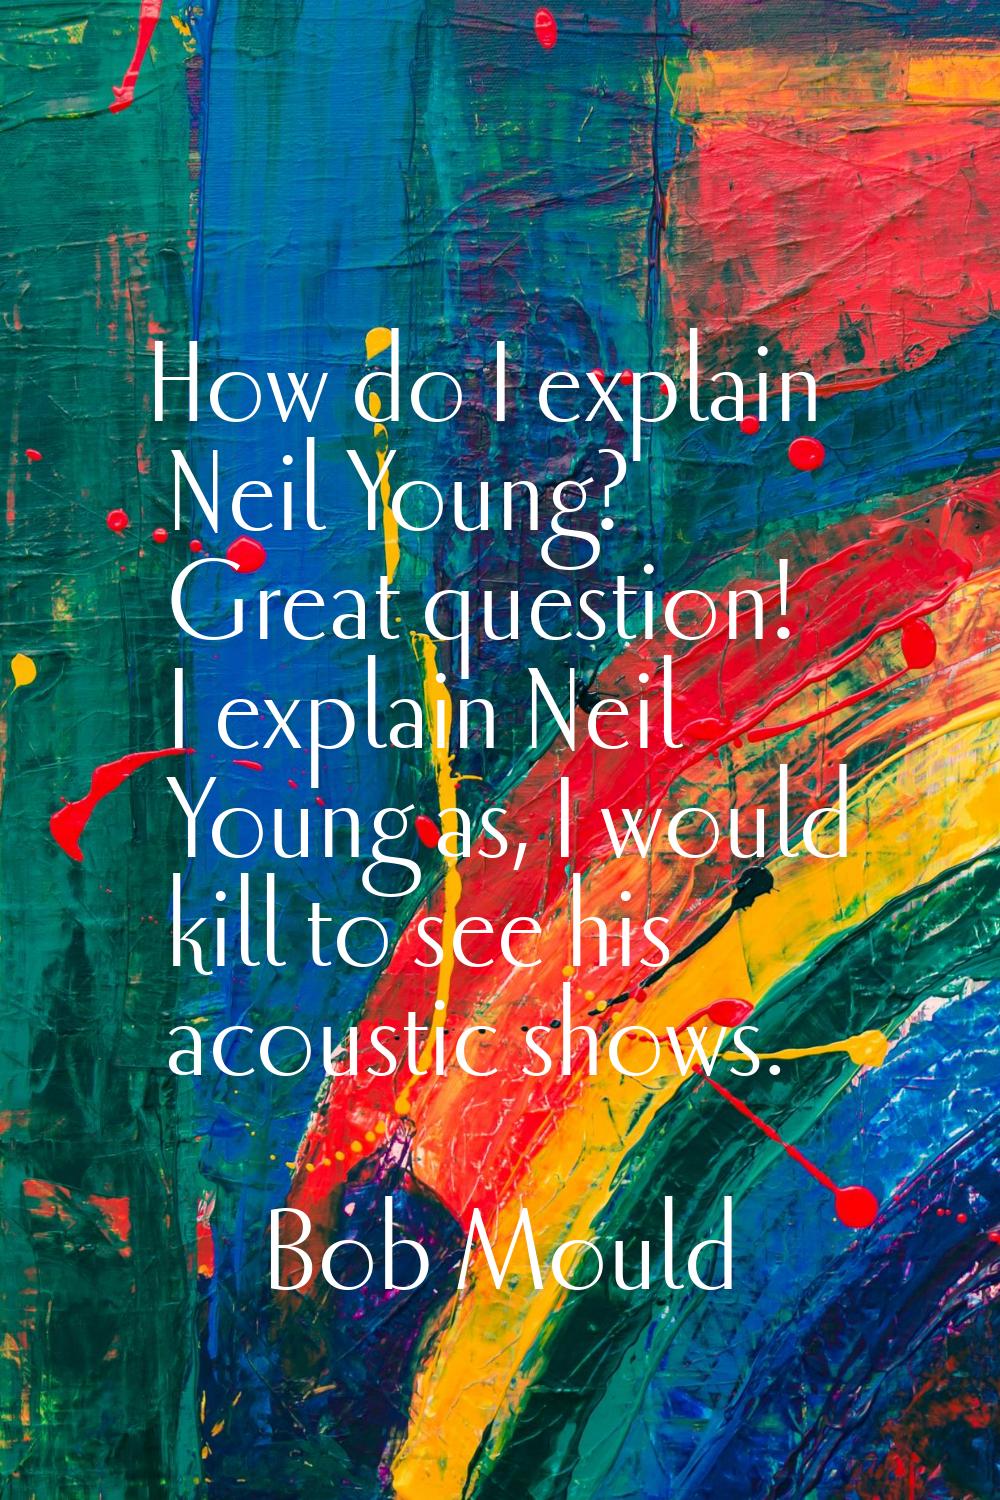 How do I explain Neil Young? Great question! I explain Neil Young as, I would kill to see his acous